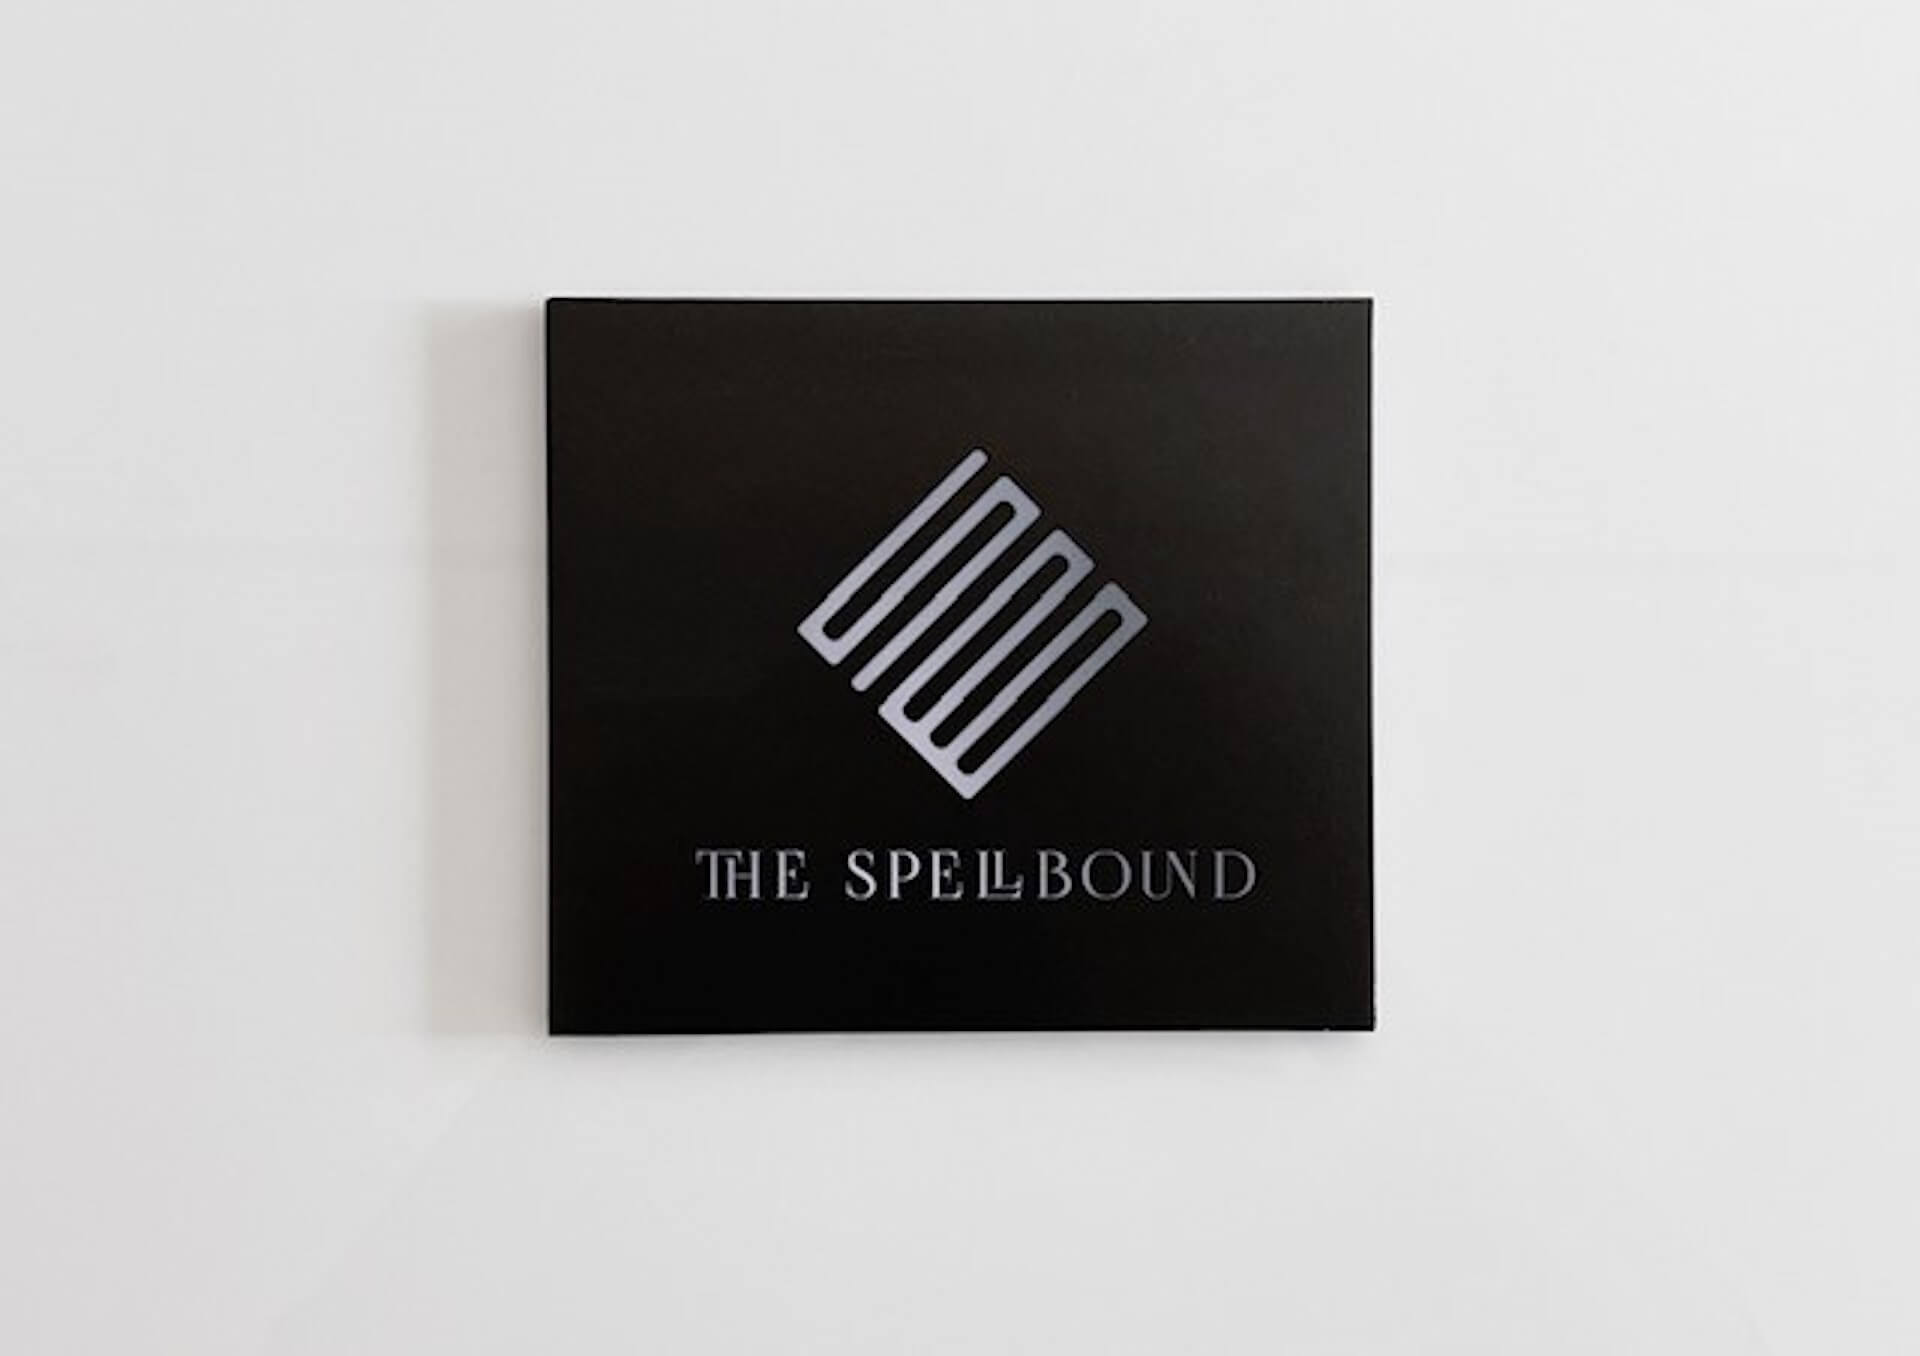 THE SPELLBOUNDの1stアルバム『THE SPELLBOUND』が発売決定！Spotify O-EASTでリリースライブも開催 music211220_the-spellbound-08